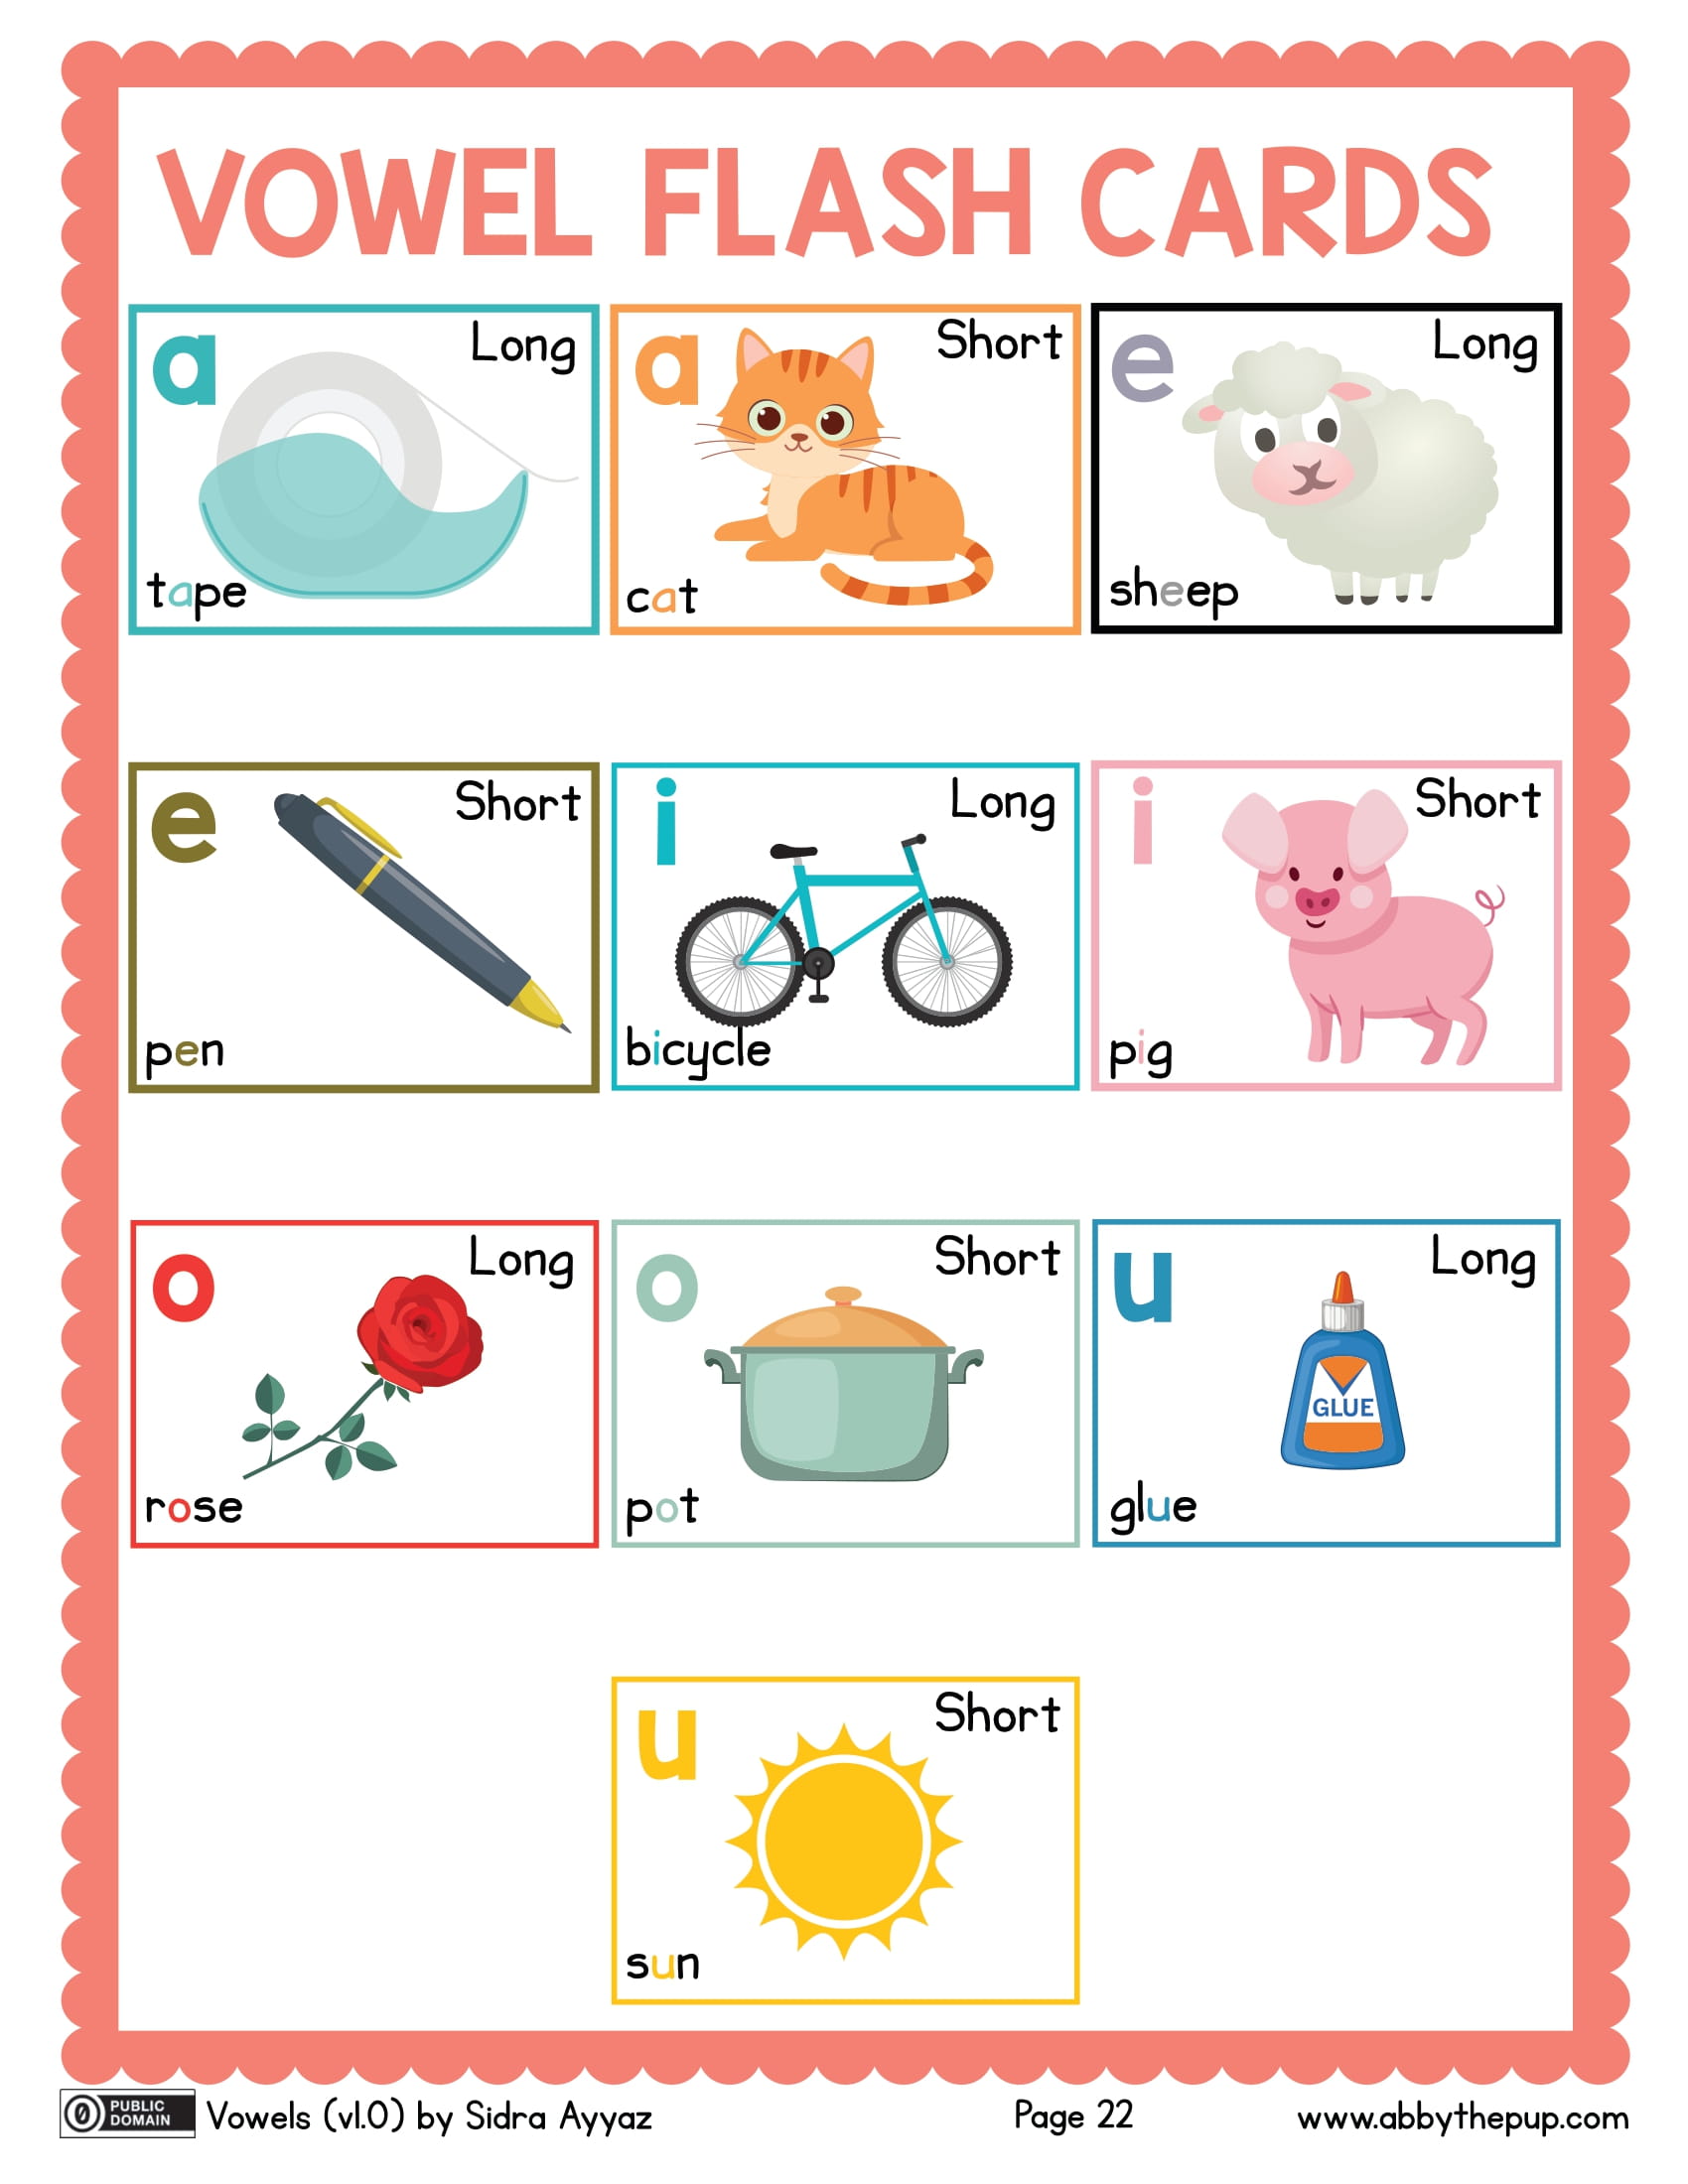 English vowel flash cards free printable puzzle games